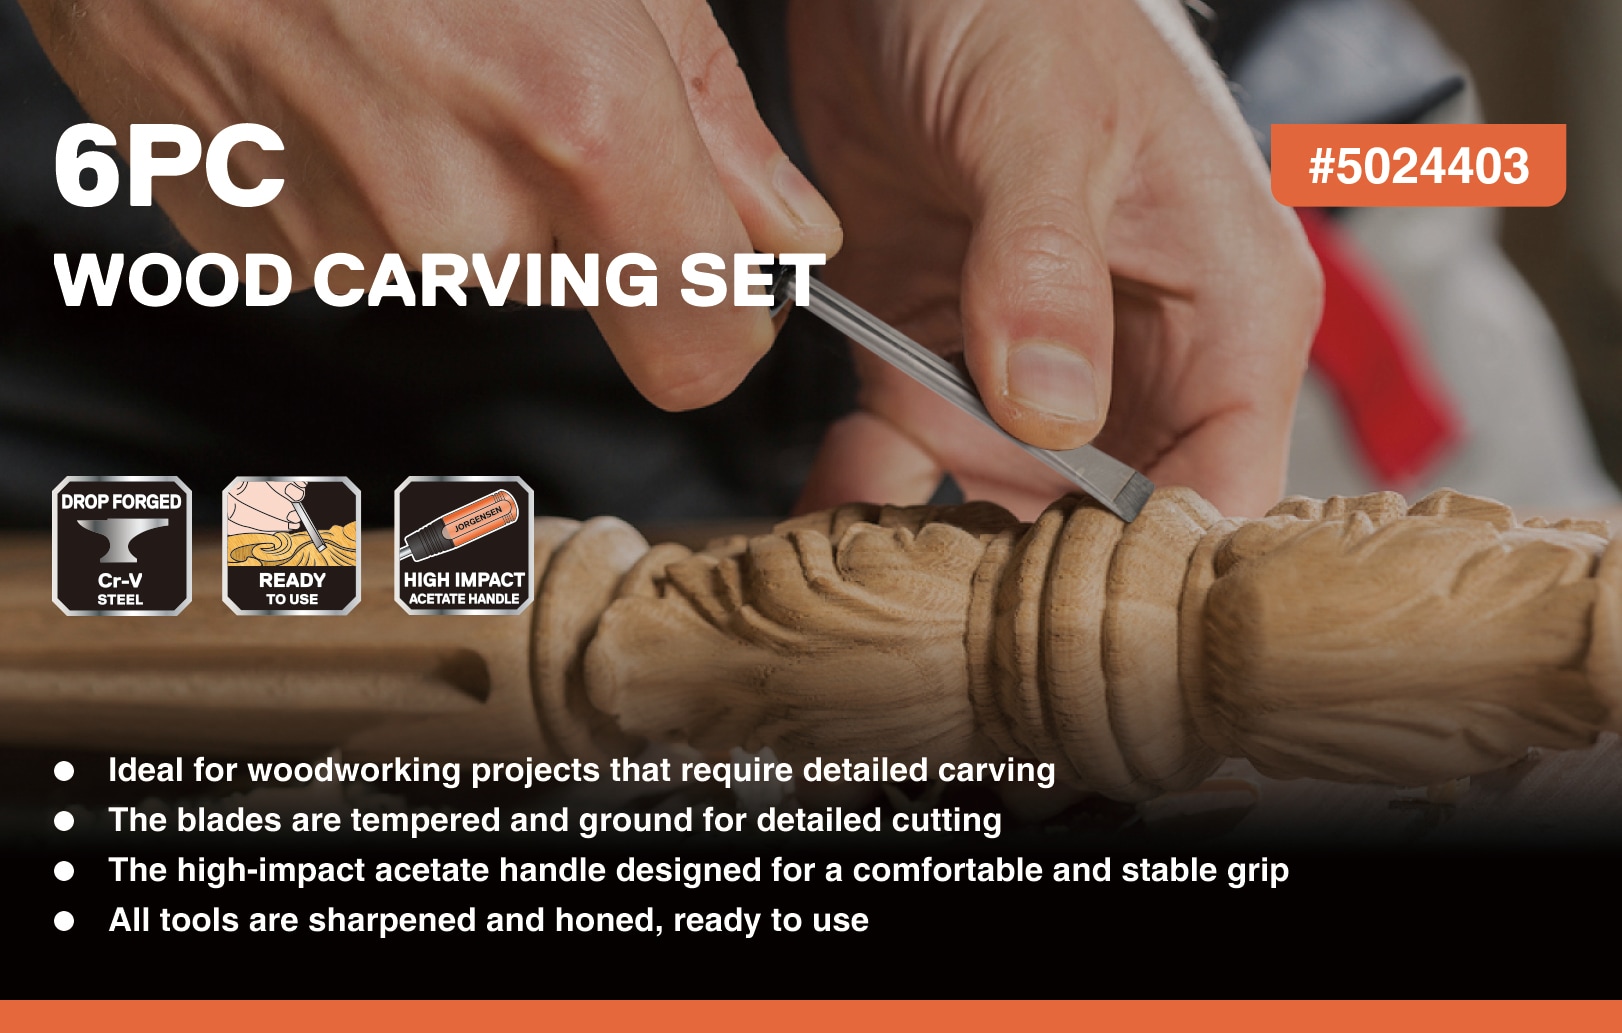 calary 24pcs Wood Carving Chisel Set Wood Carving Kit Including Small and Large Size Wood Carver Set